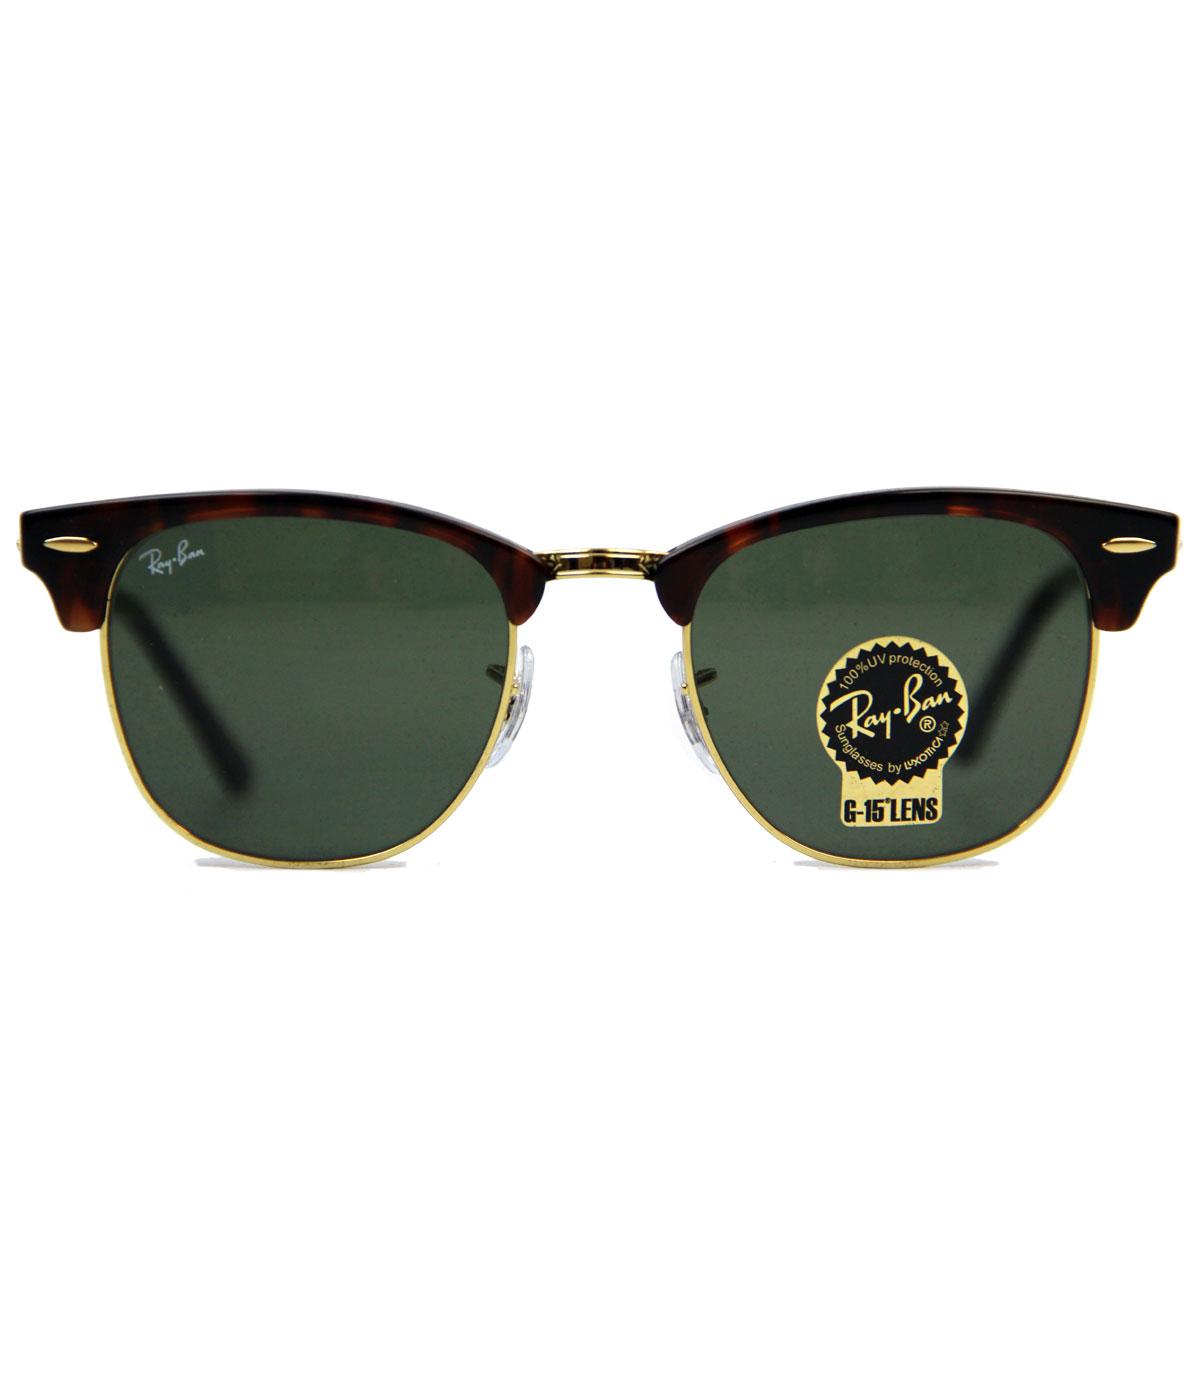 Ray-Ban Retro Mod Clubmaster Indie Sunglasses in Brown